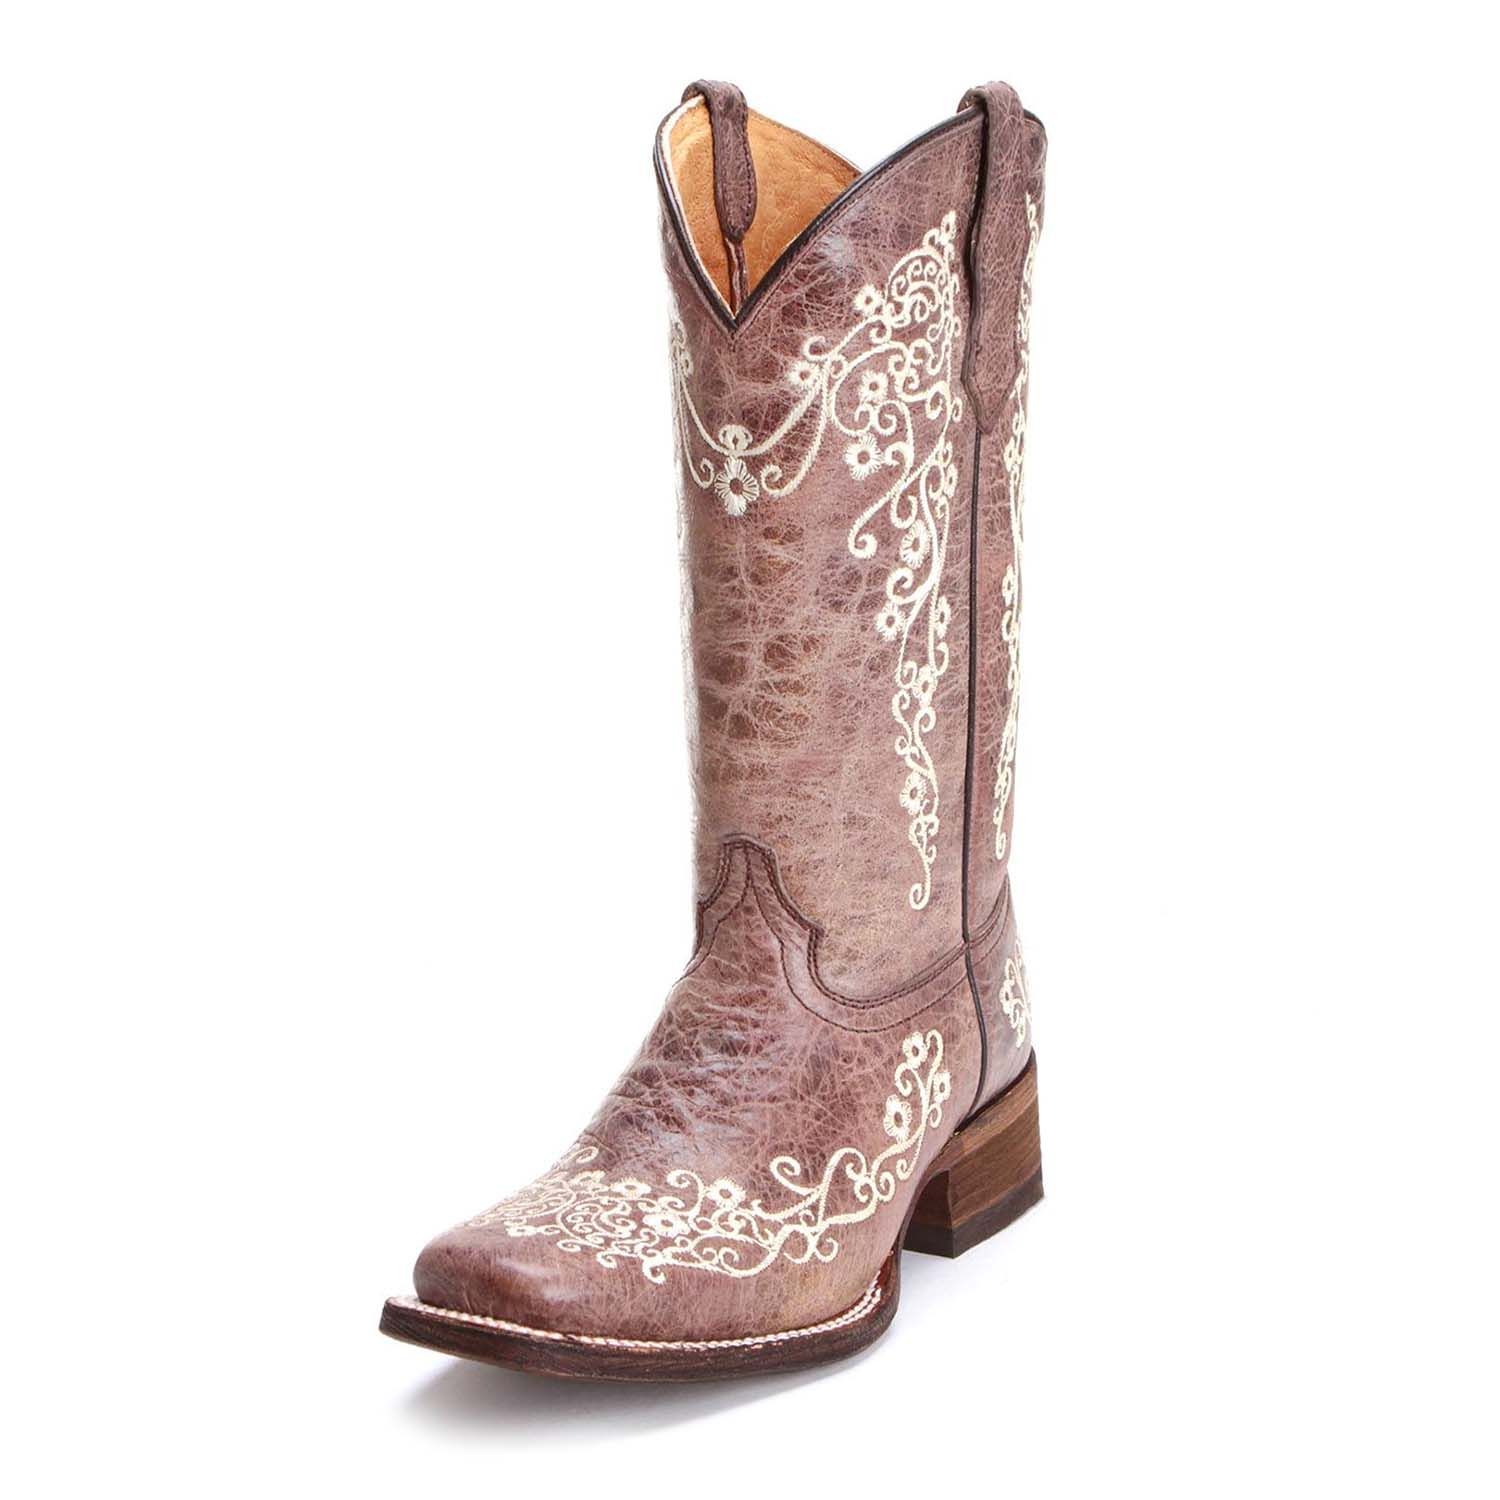 Embroidered Flower Design Kid,s Genuine Leather Cowboy Western Snip Toe Boot 